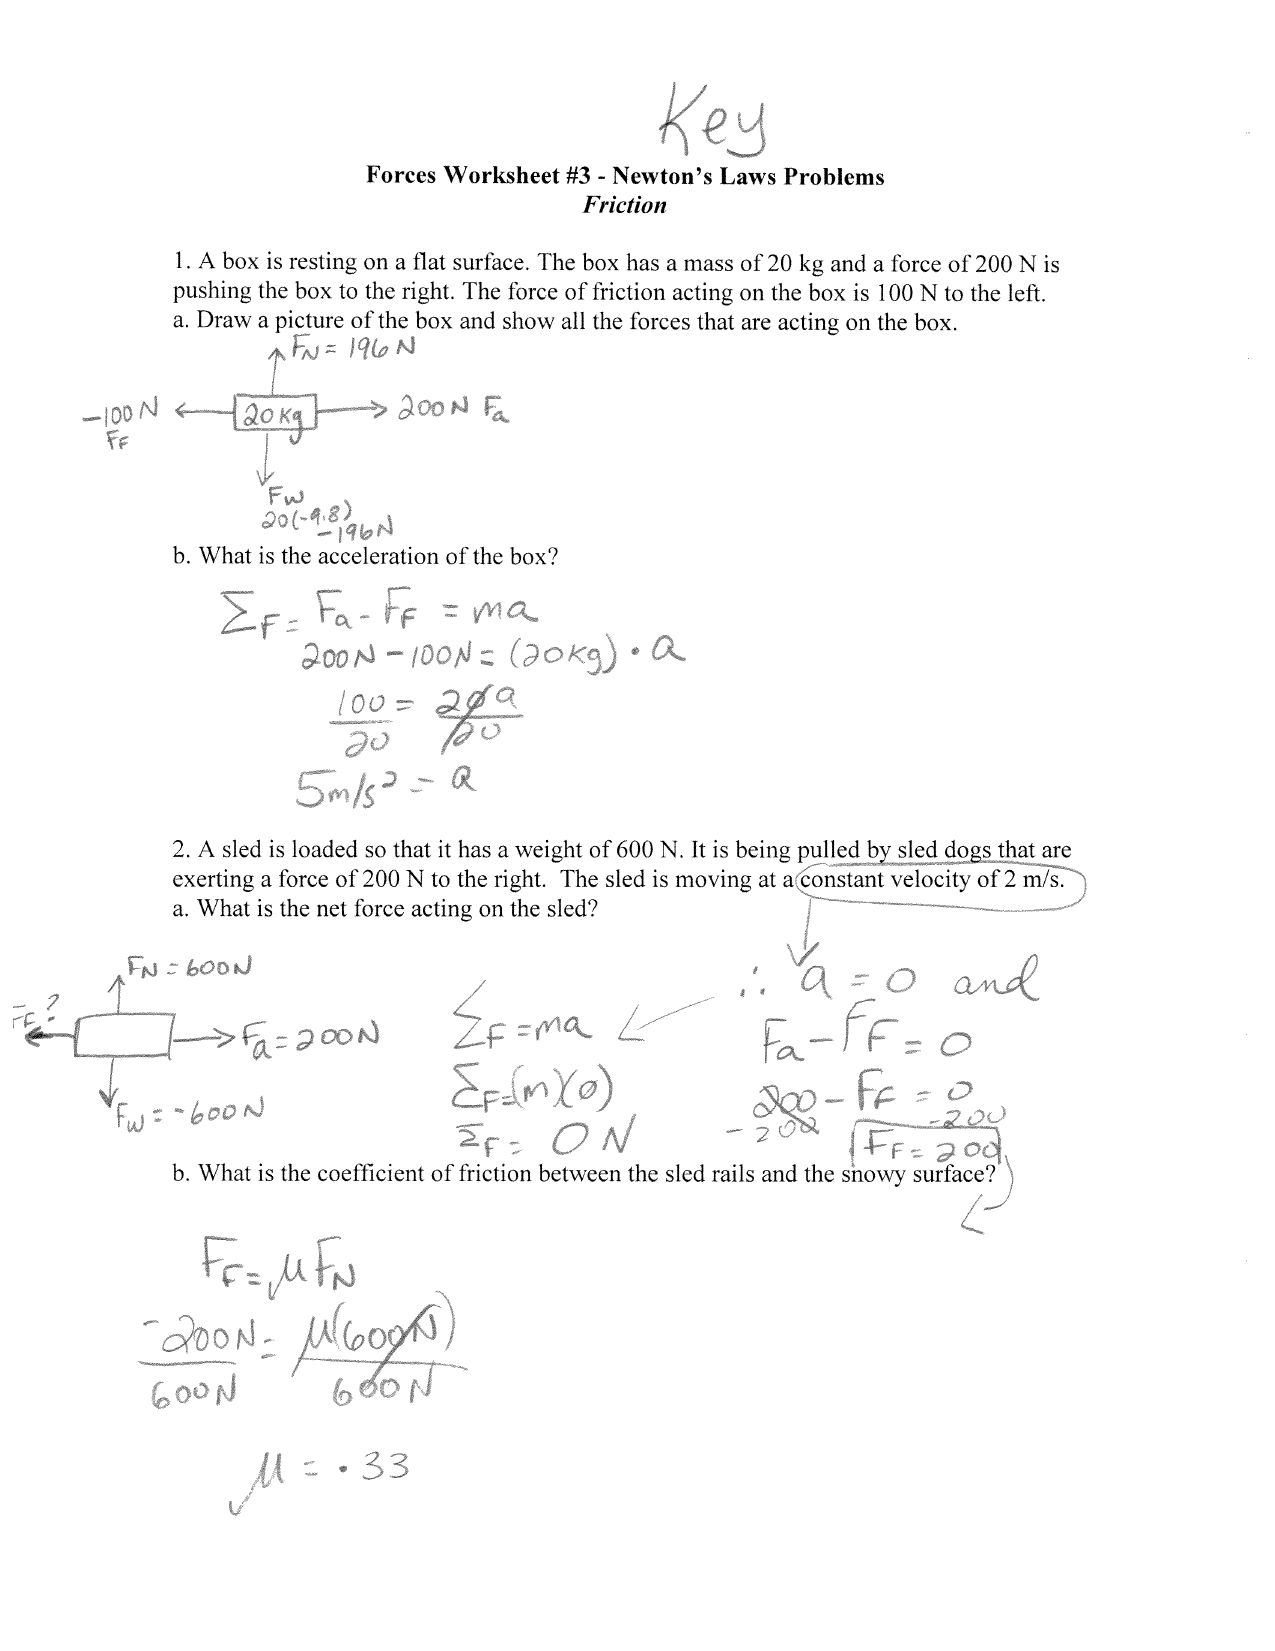 Friction Worksheet Answer Key Along With Friction Worksheet Answers